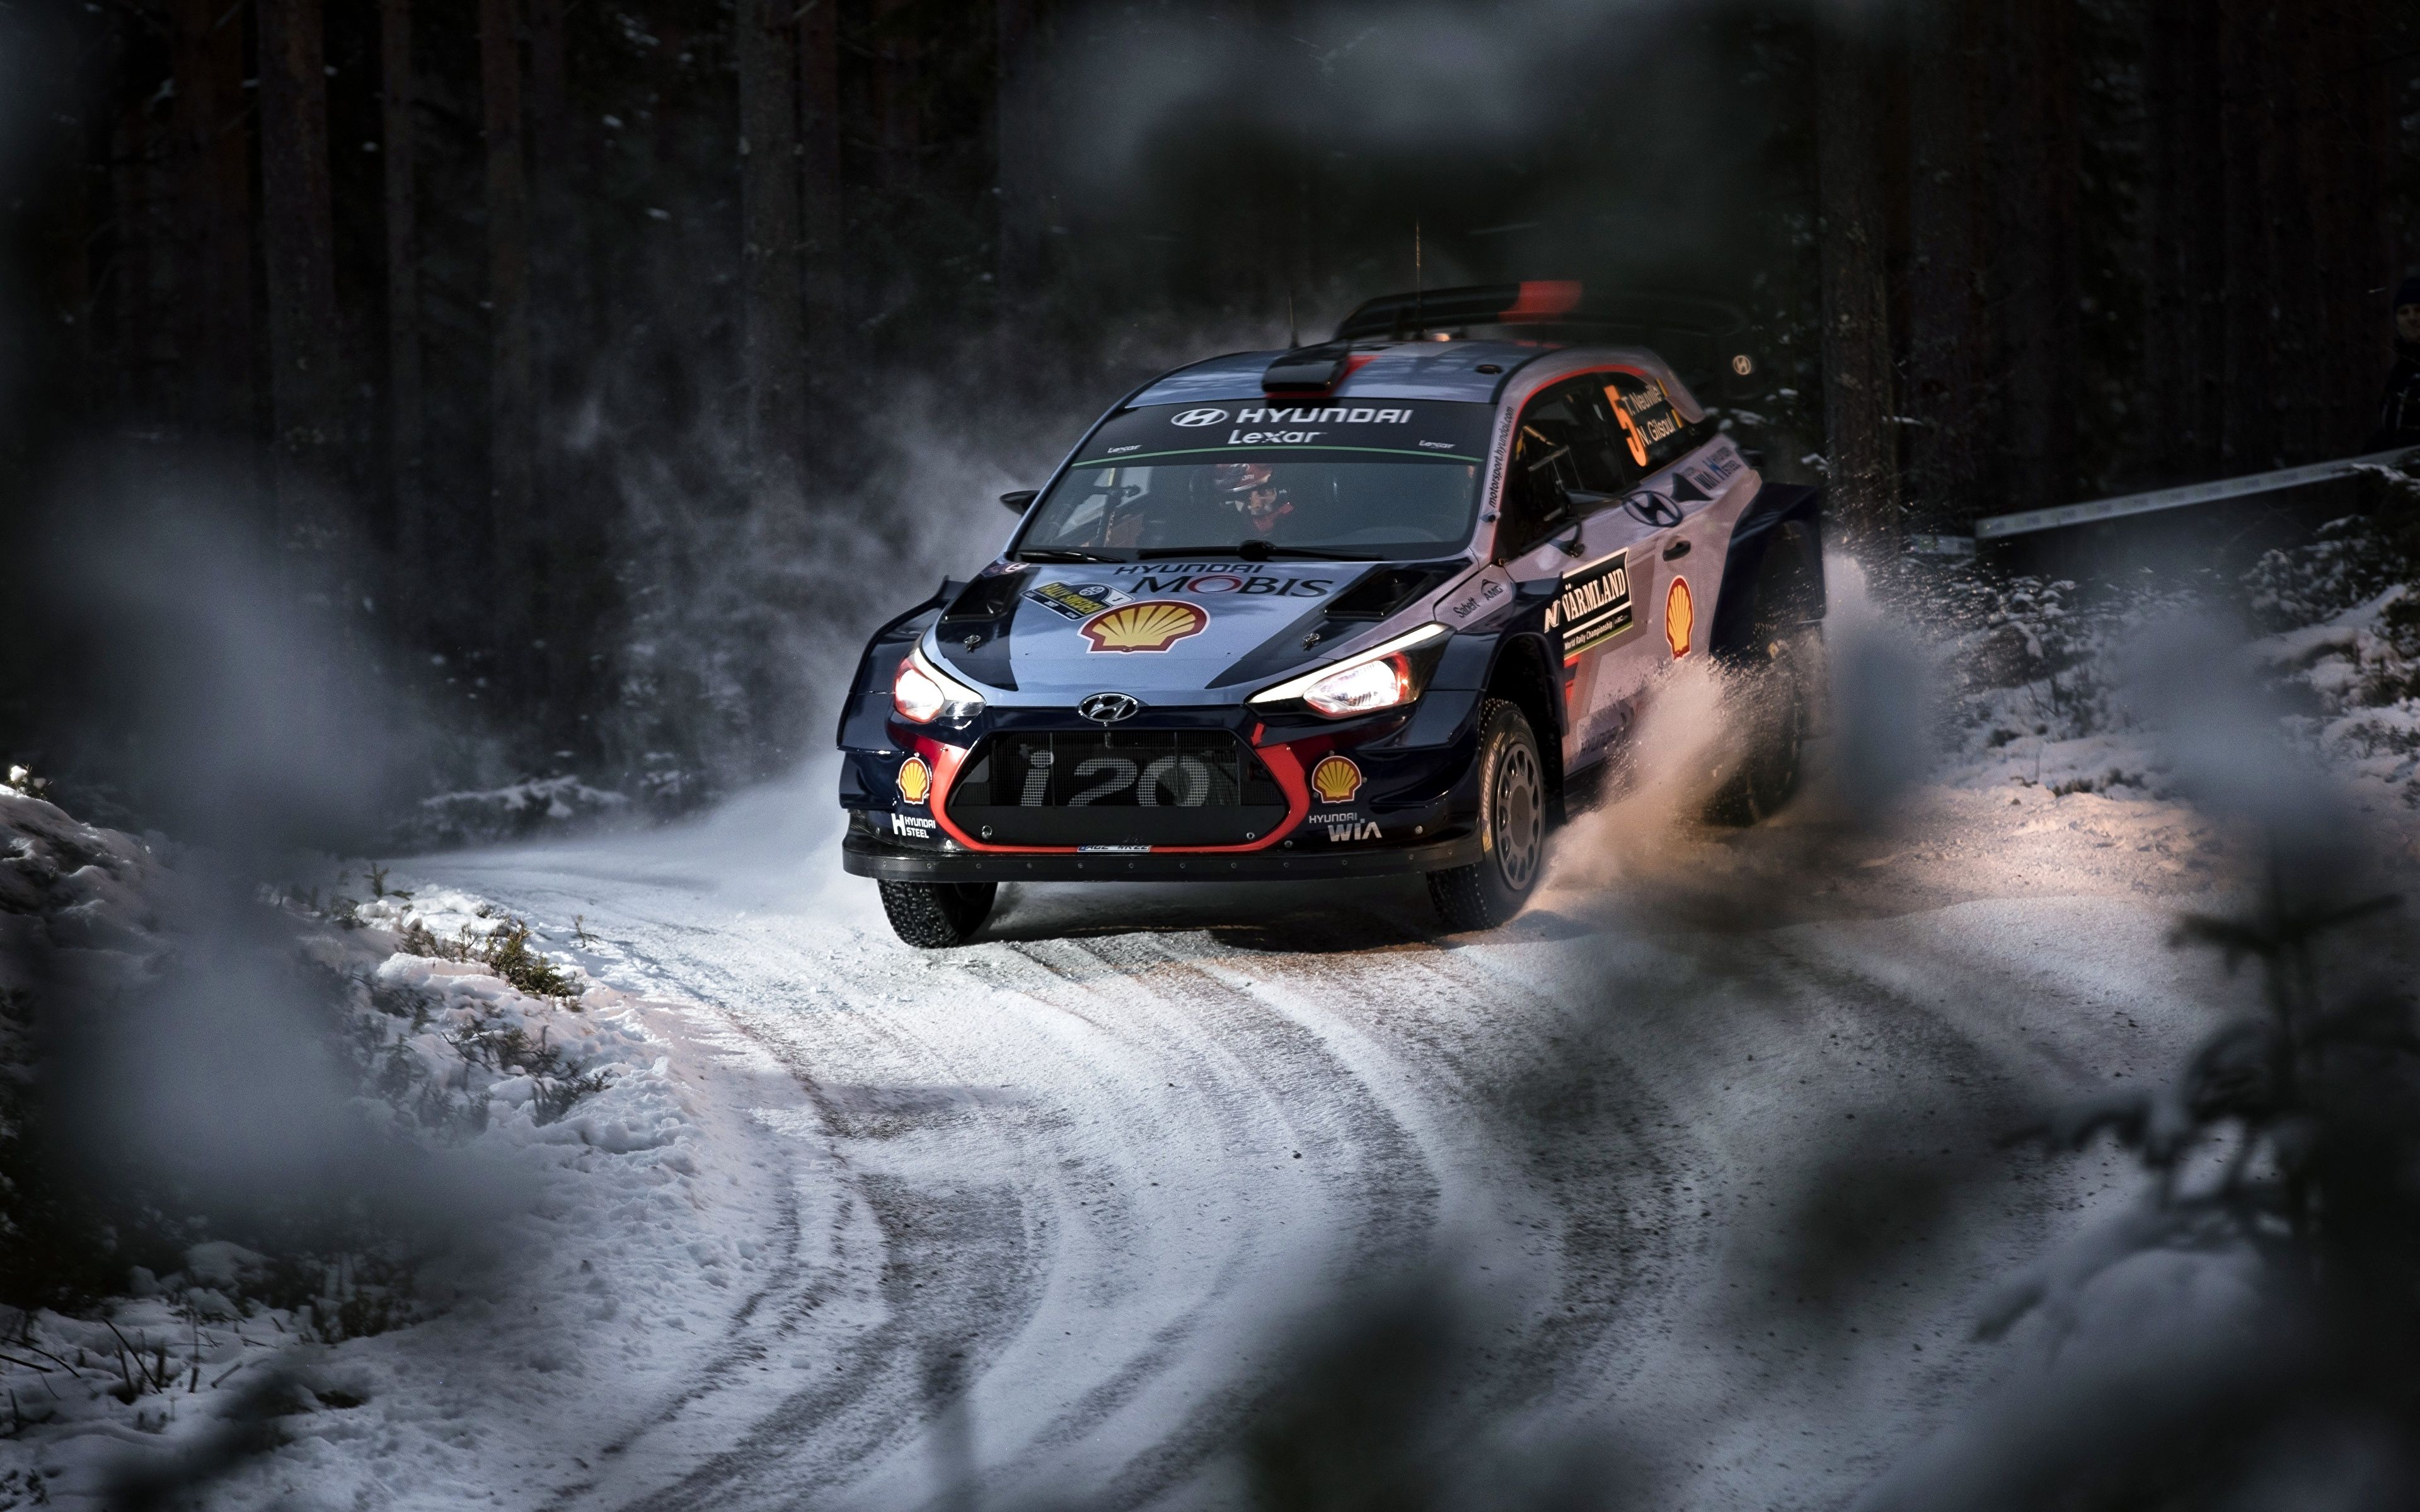 3840x2400 Picture Hyundai Rallying i20 WRC Thierry Neuville Cars 3840x2400 on WallpaperBat